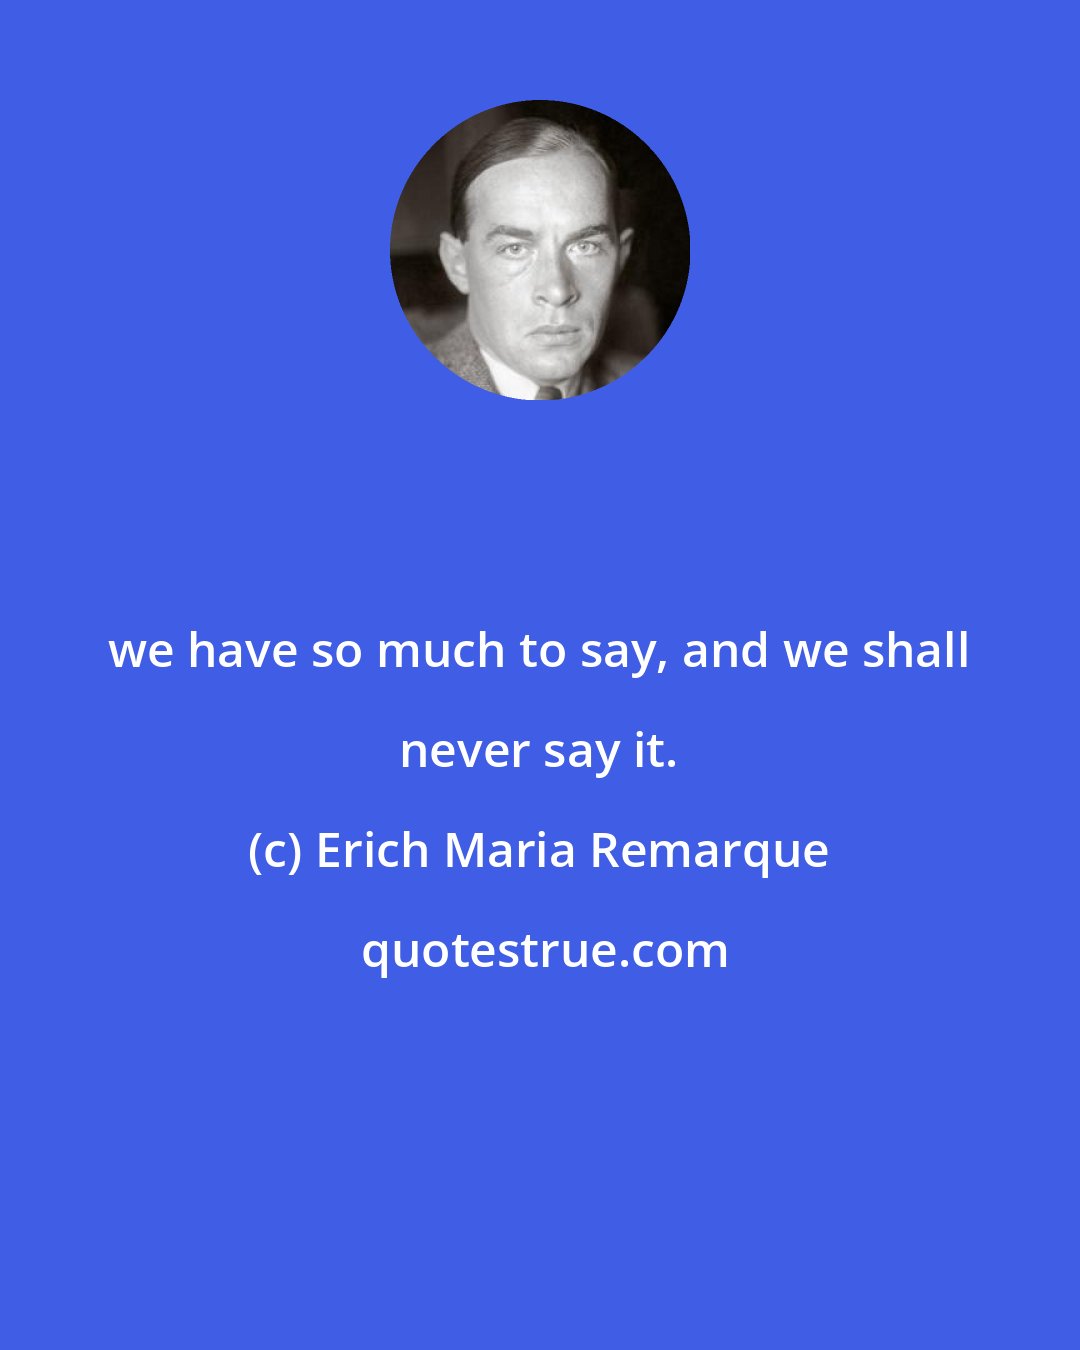 Erich Maria Remarque: we have so much to say, and we shall never say it.